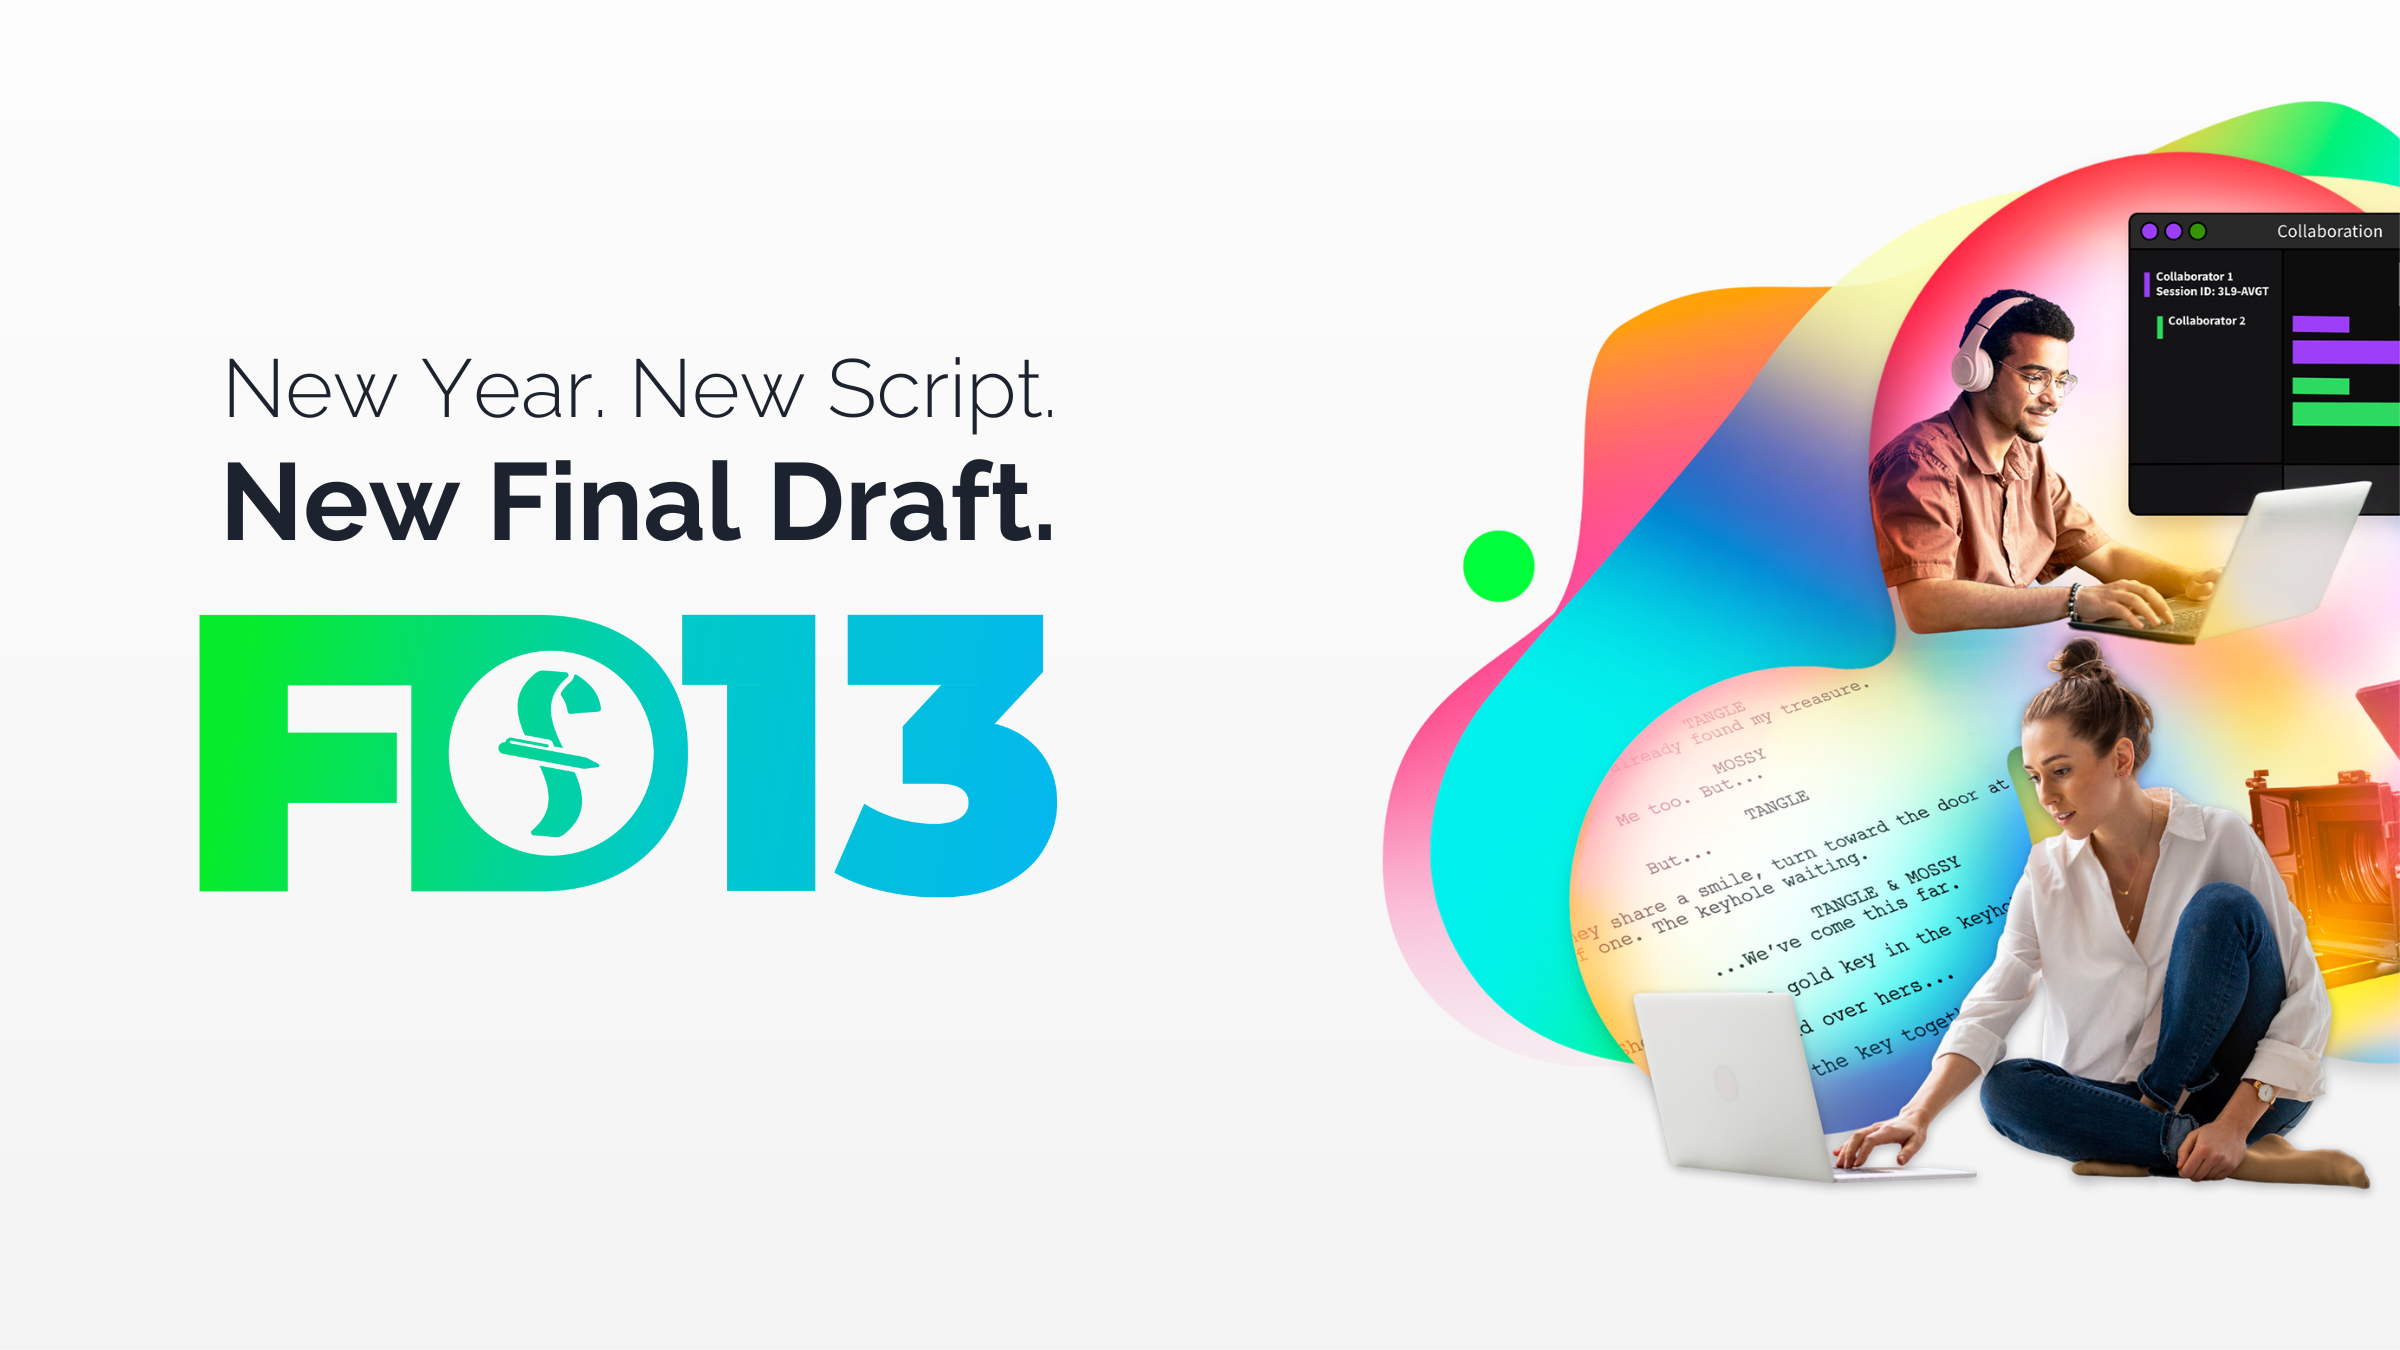 Final Draft 13 Is Here!